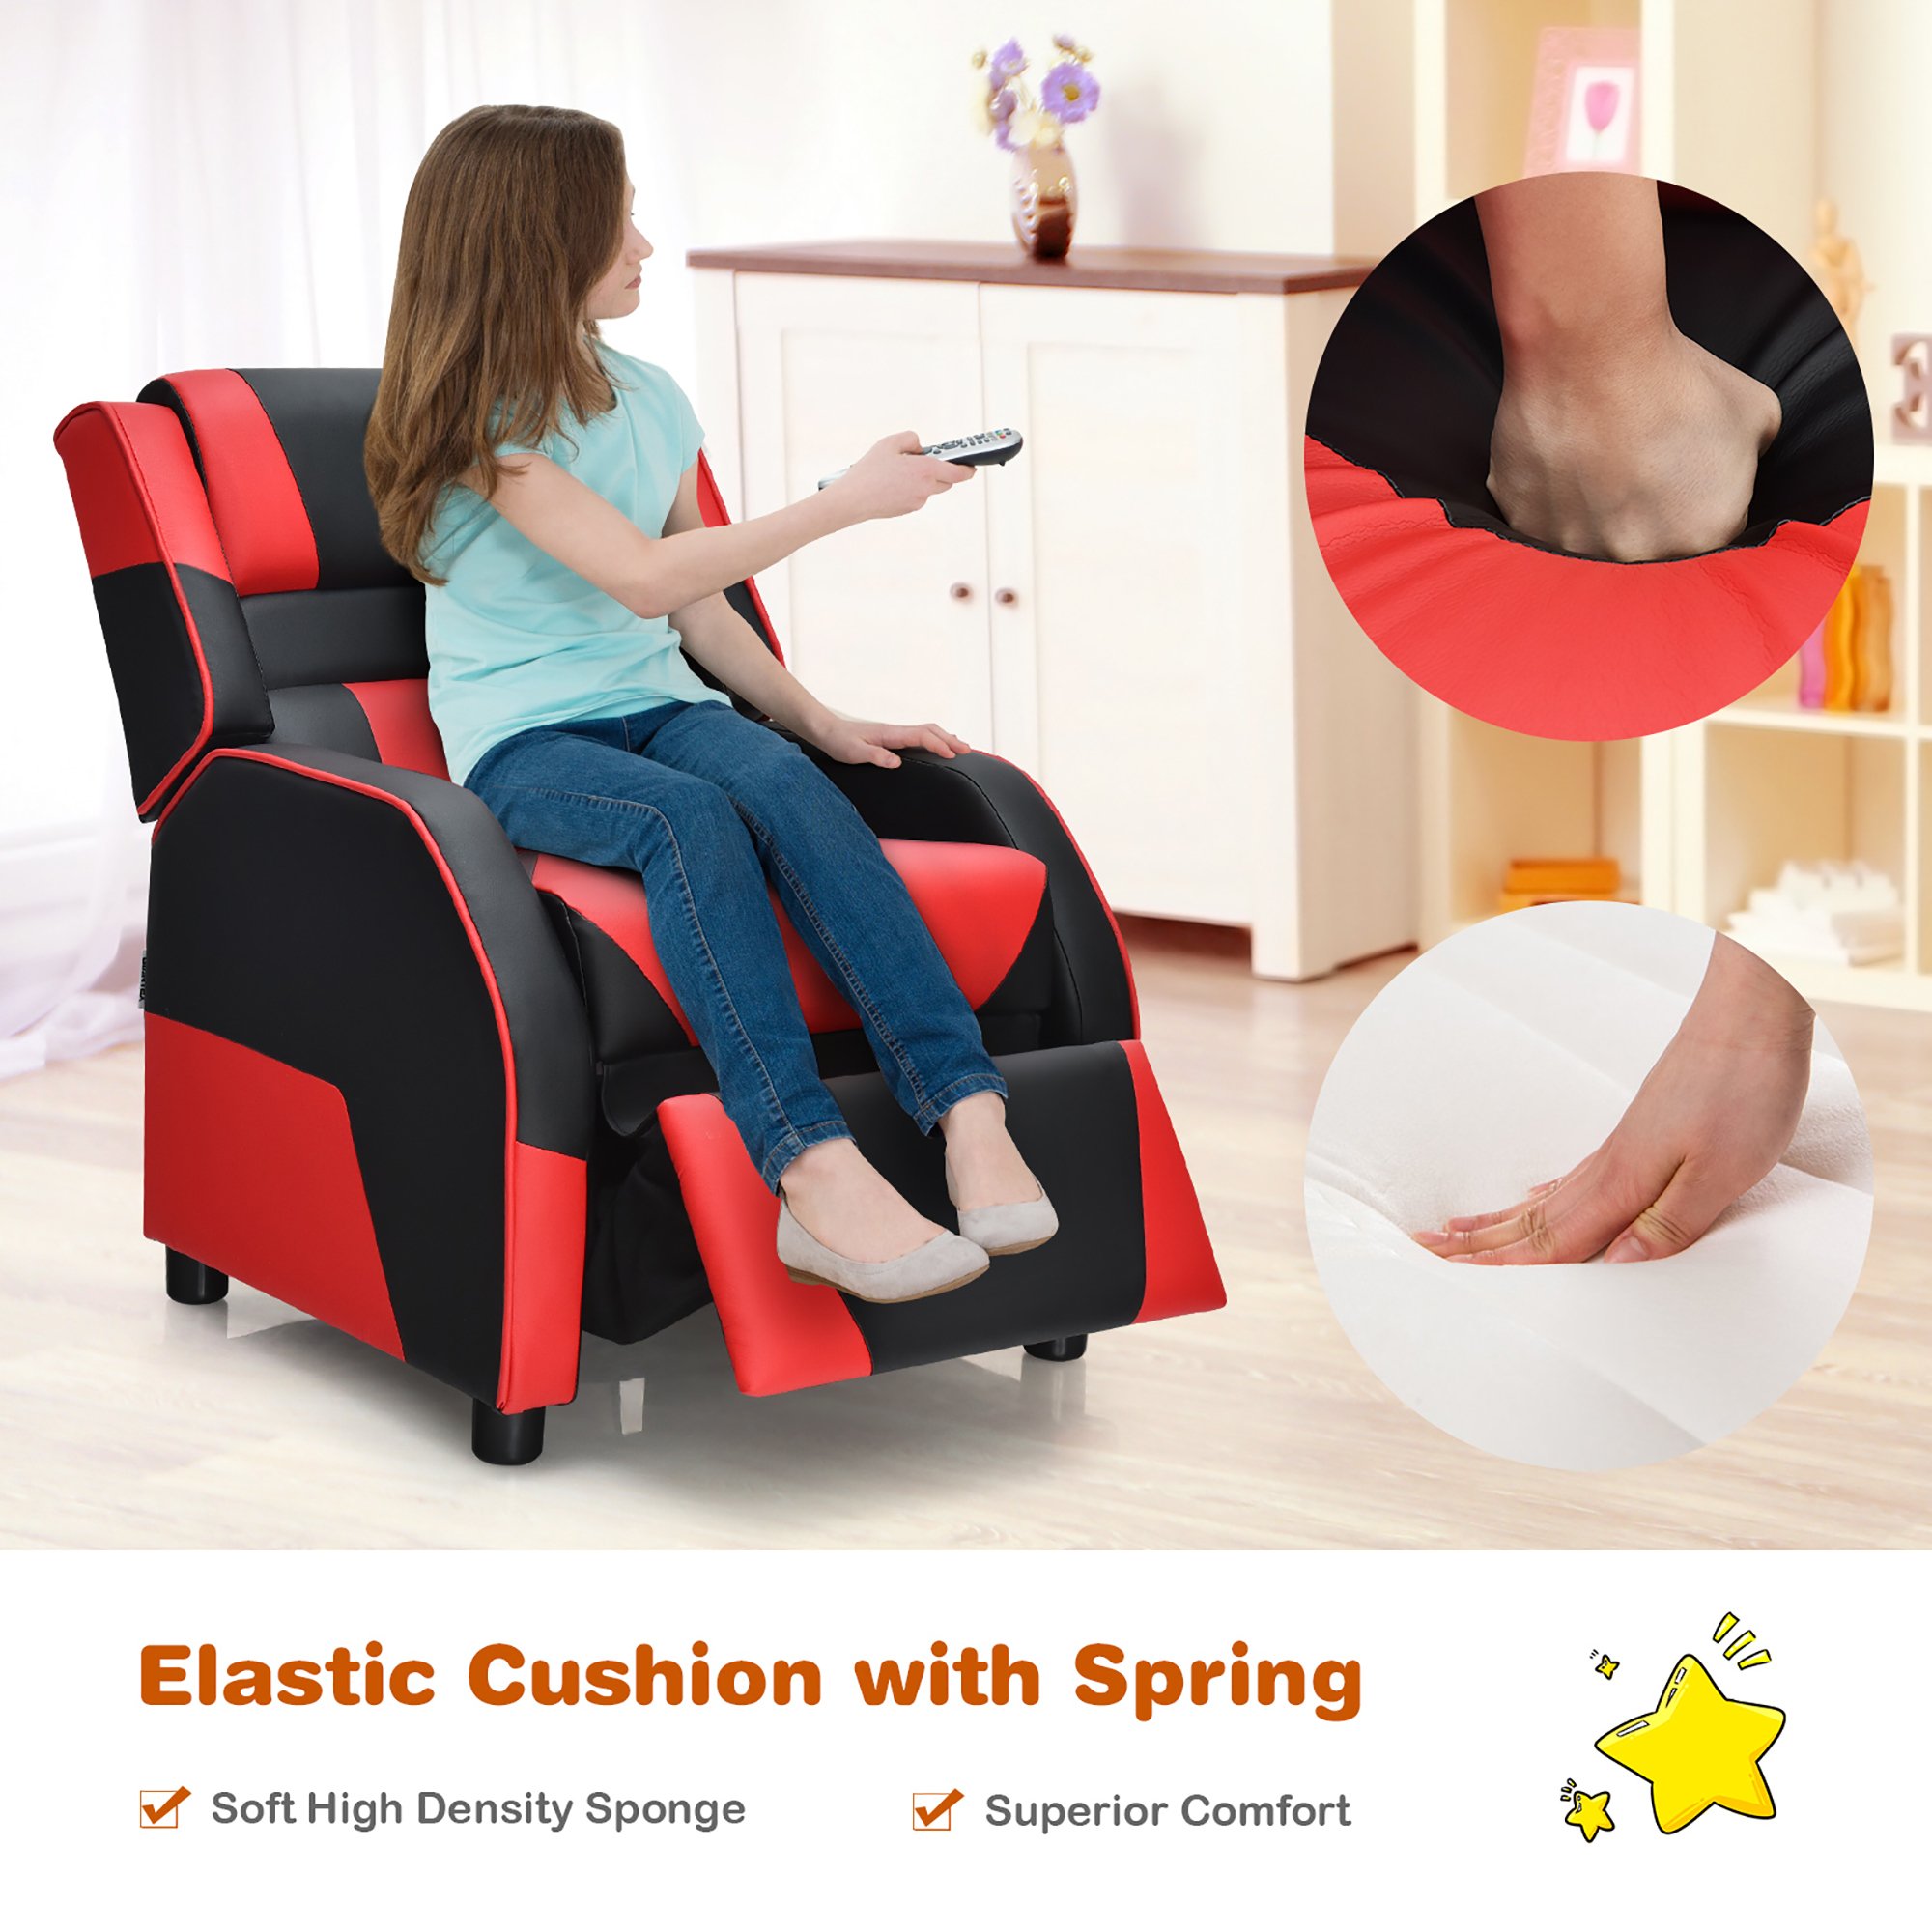 Costway Kids Youth Gaming Sofa Recliner w/Headrest & Footrest PU Leather Red